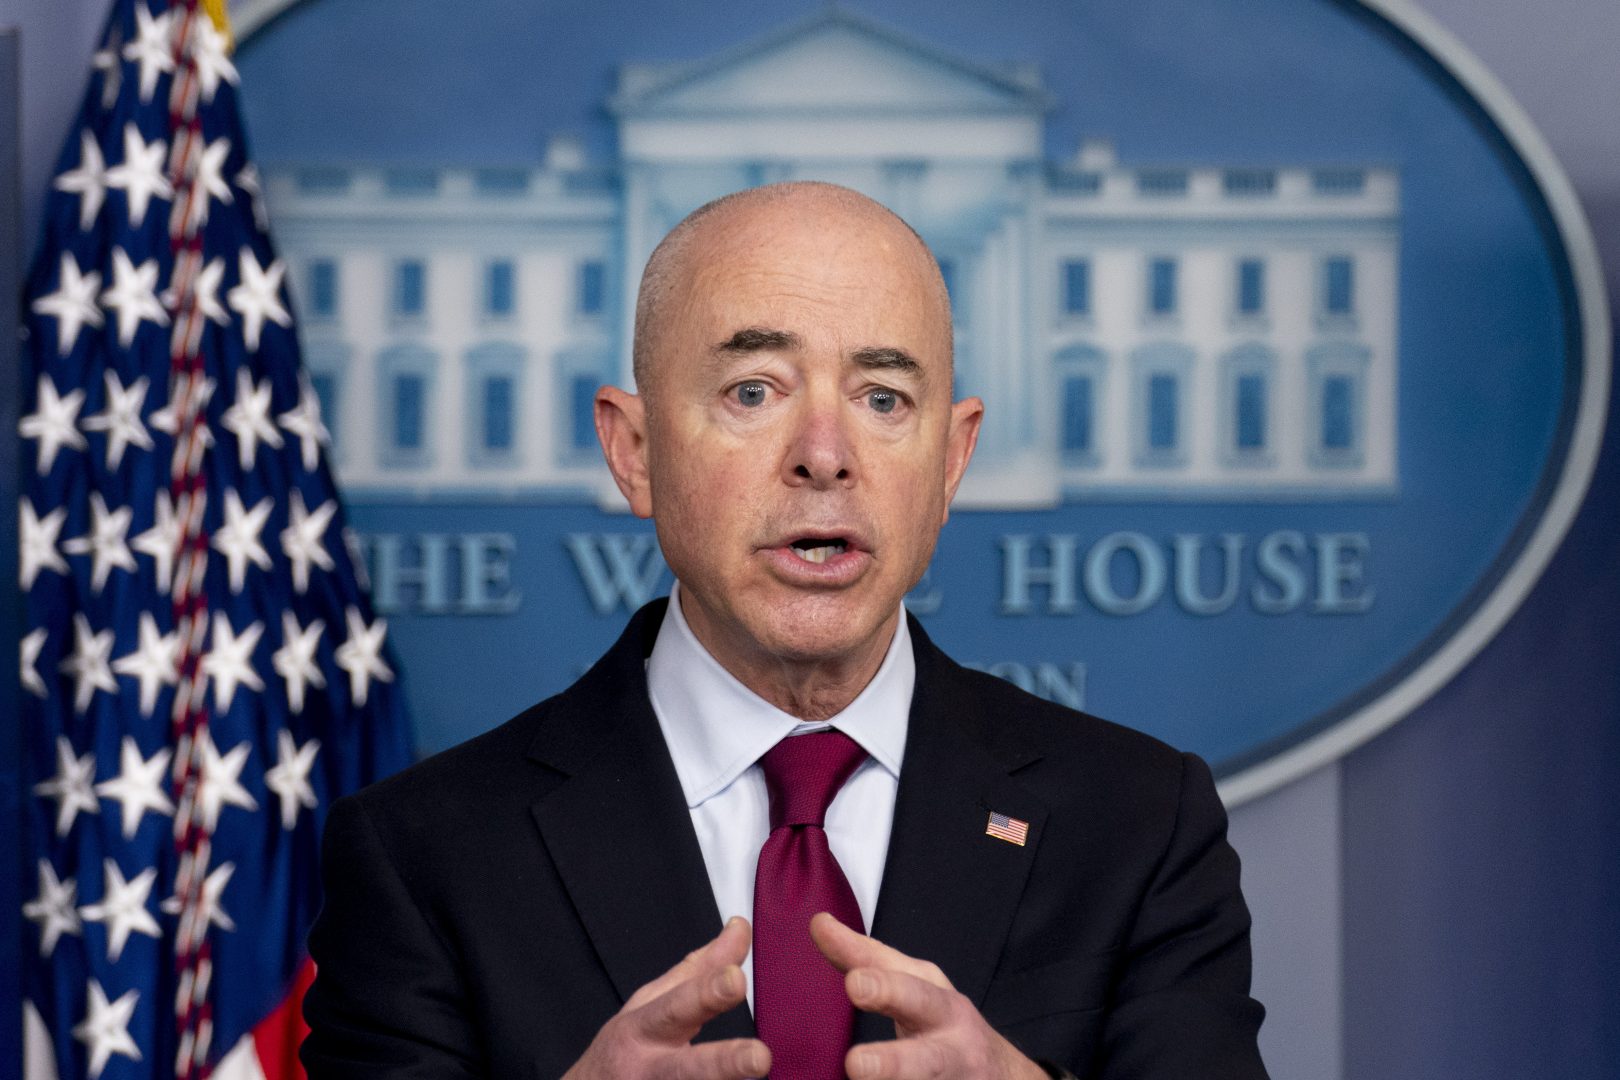 Homeland Security Secretary Alejandro Mayorkas speaks during a press briefing at the White House, Monday, March 1, 2021, in Washington.